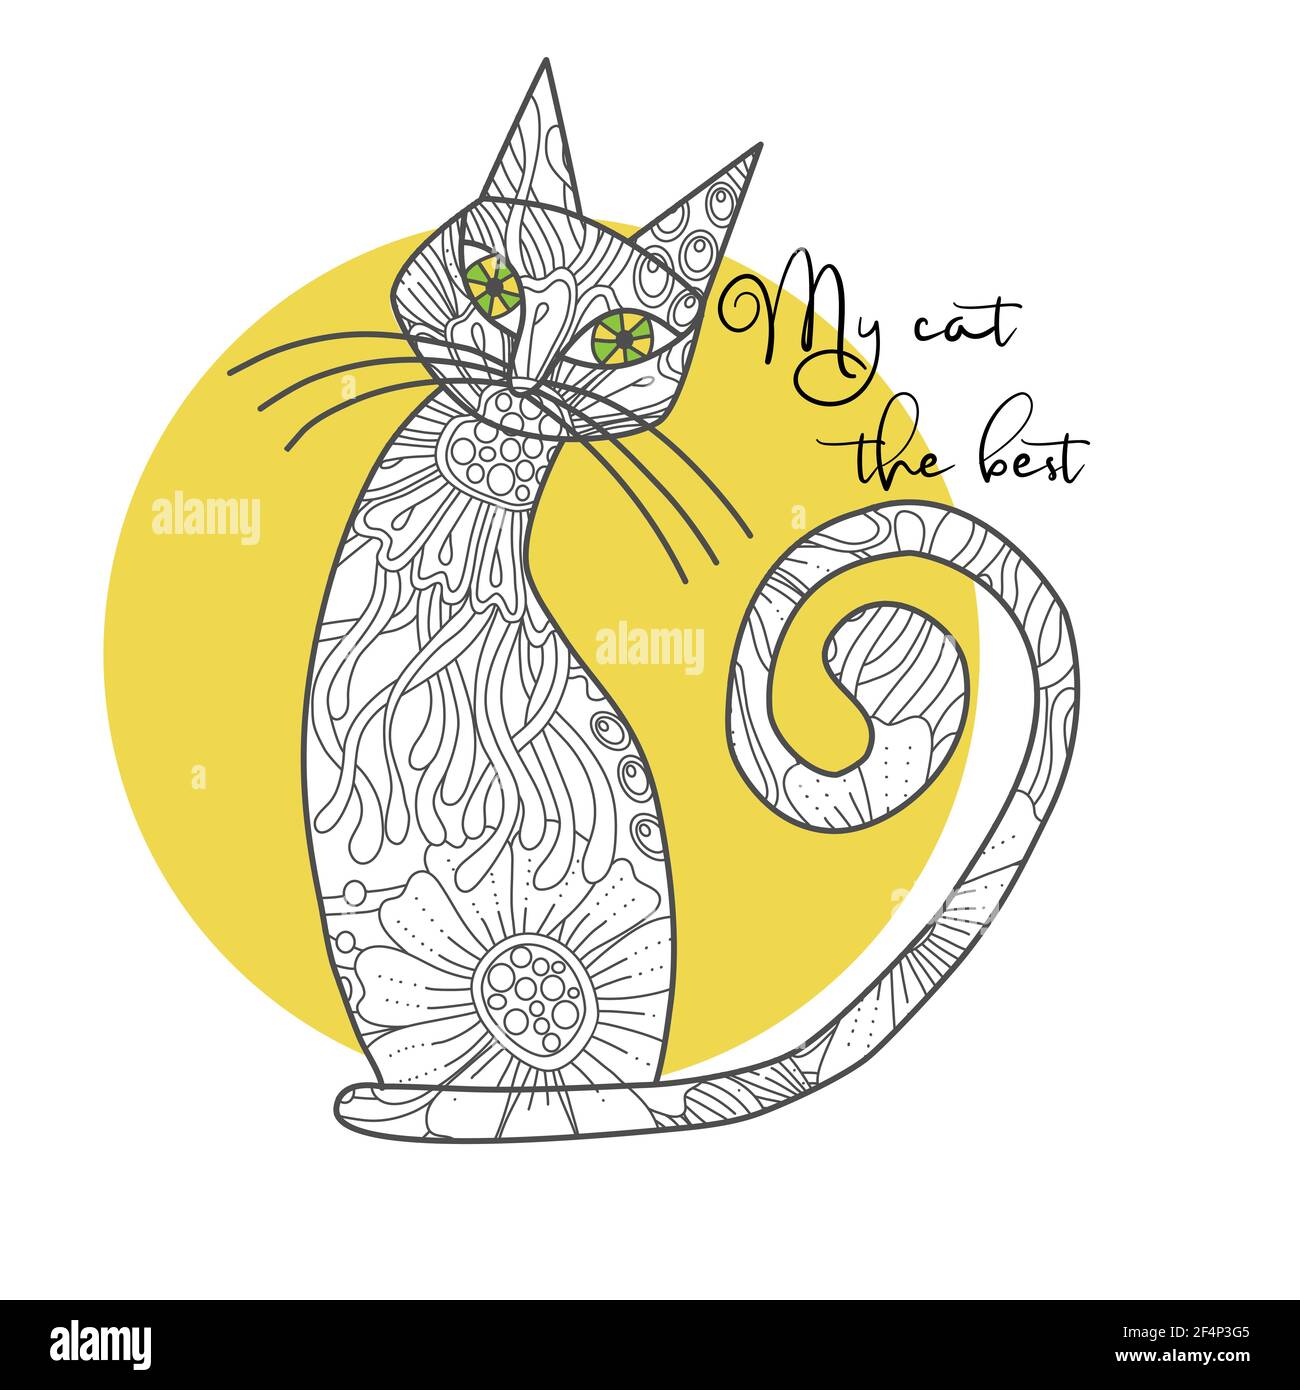 Cute cat with doodle abstract flowers and leaves, quote - my cat the best. Vector hand drawn outline illustration. Stock Vector